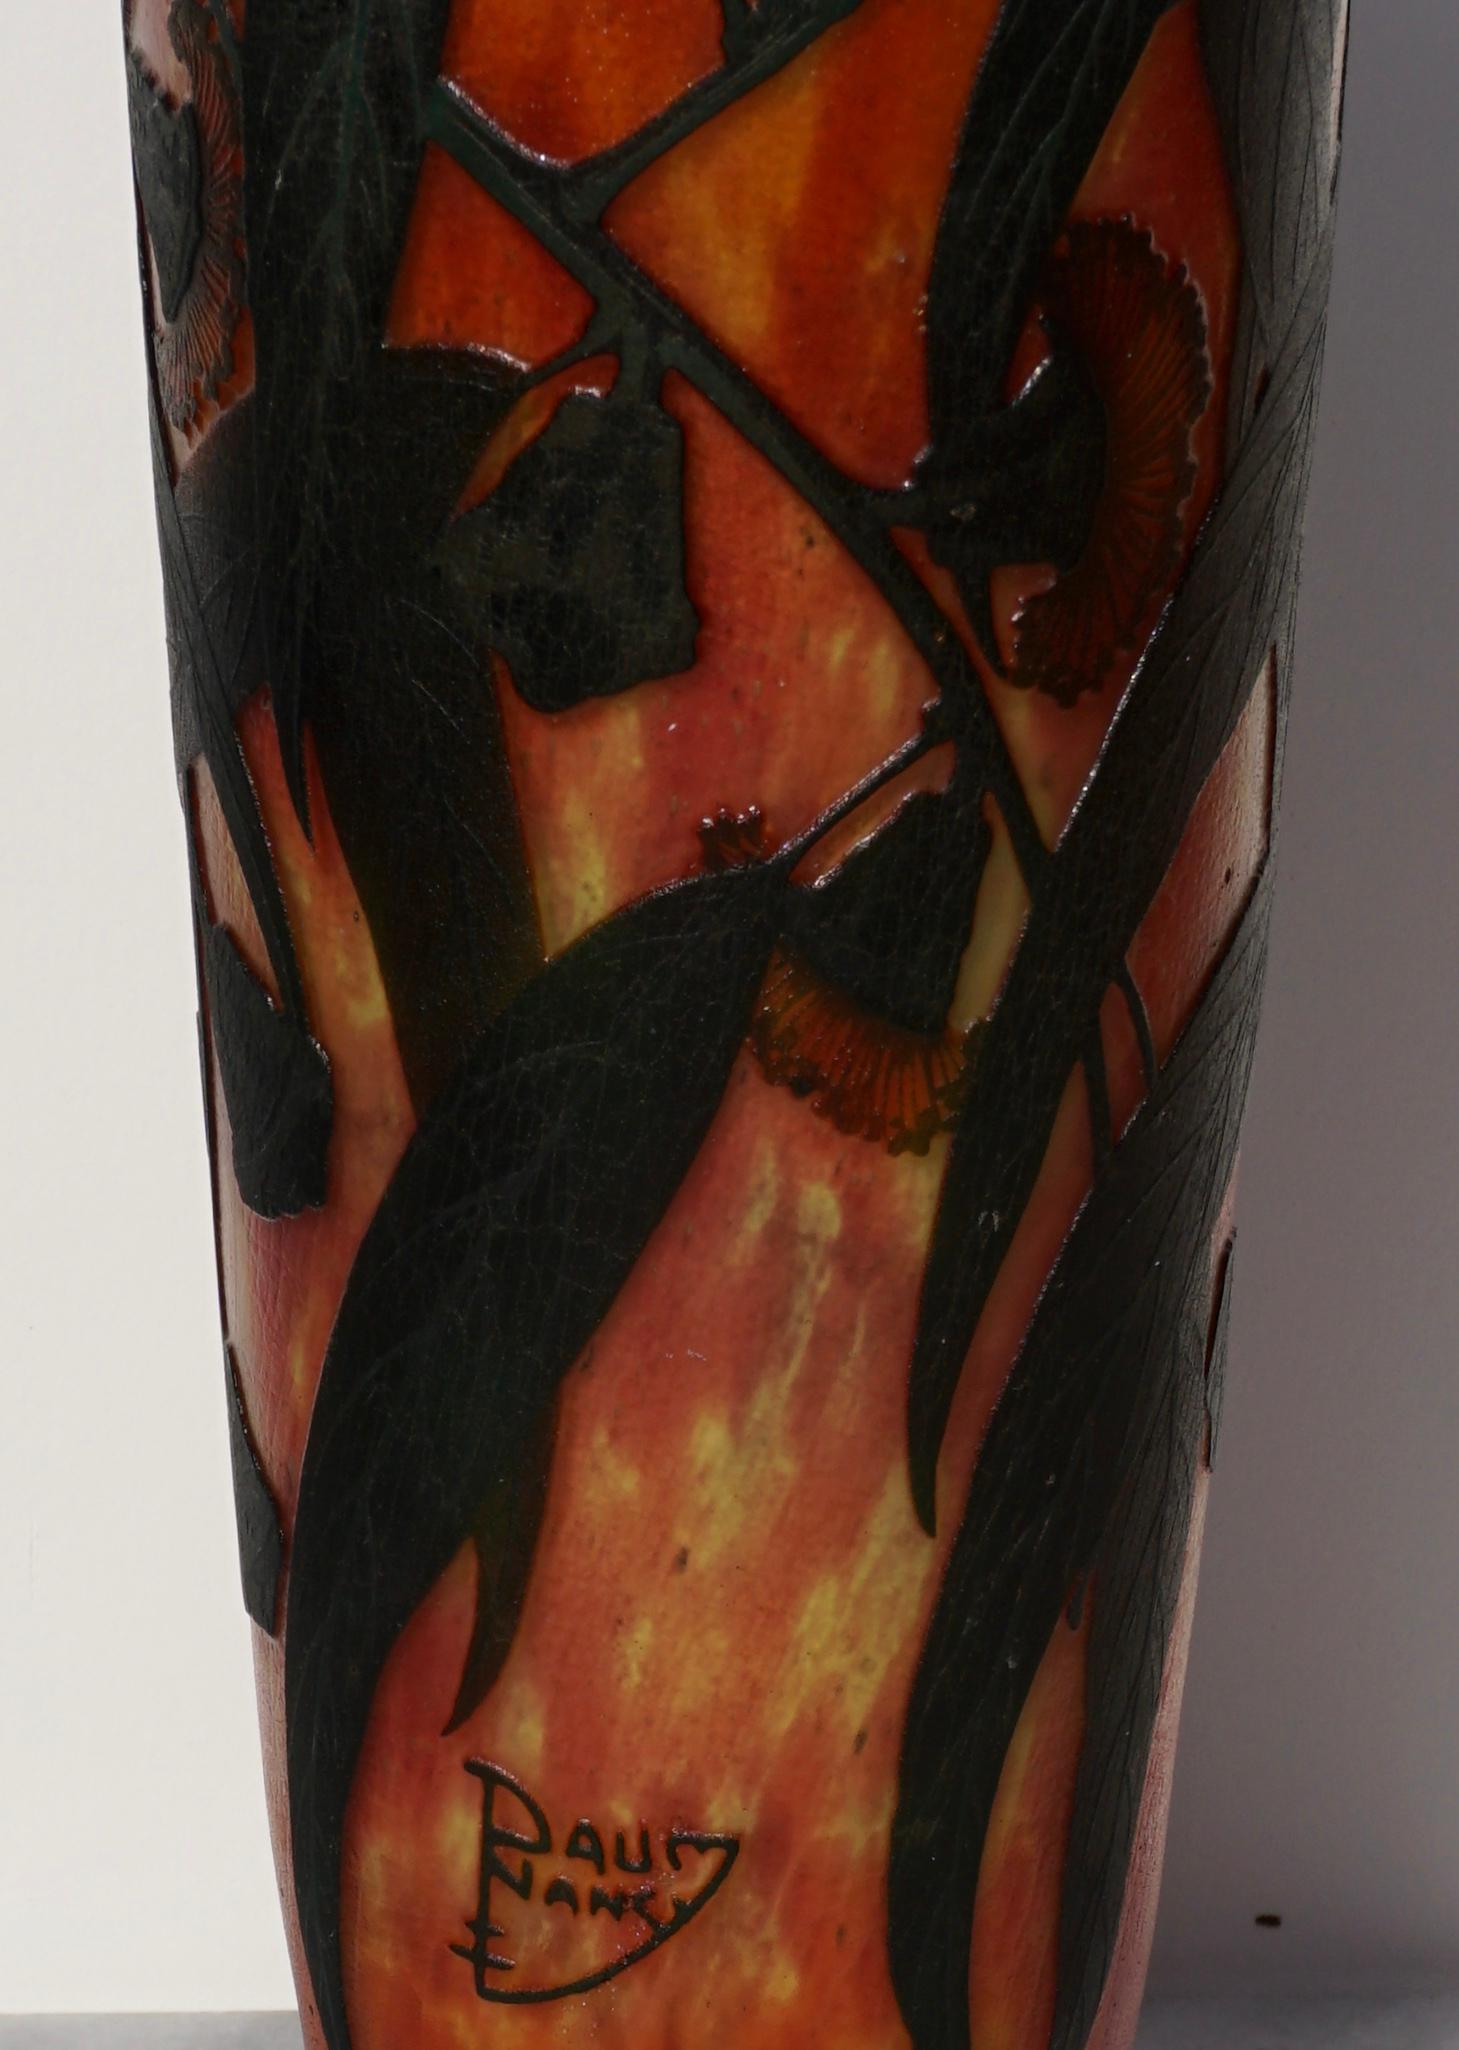 A large and wonderful red and green Art Nouveau deeply carved, acid etched and enameled Daum Nancy glass vase. With several flowers entwined in vines and leaves on a variegated orange, yellow and red background and standing at 12.5 inches.

Signed